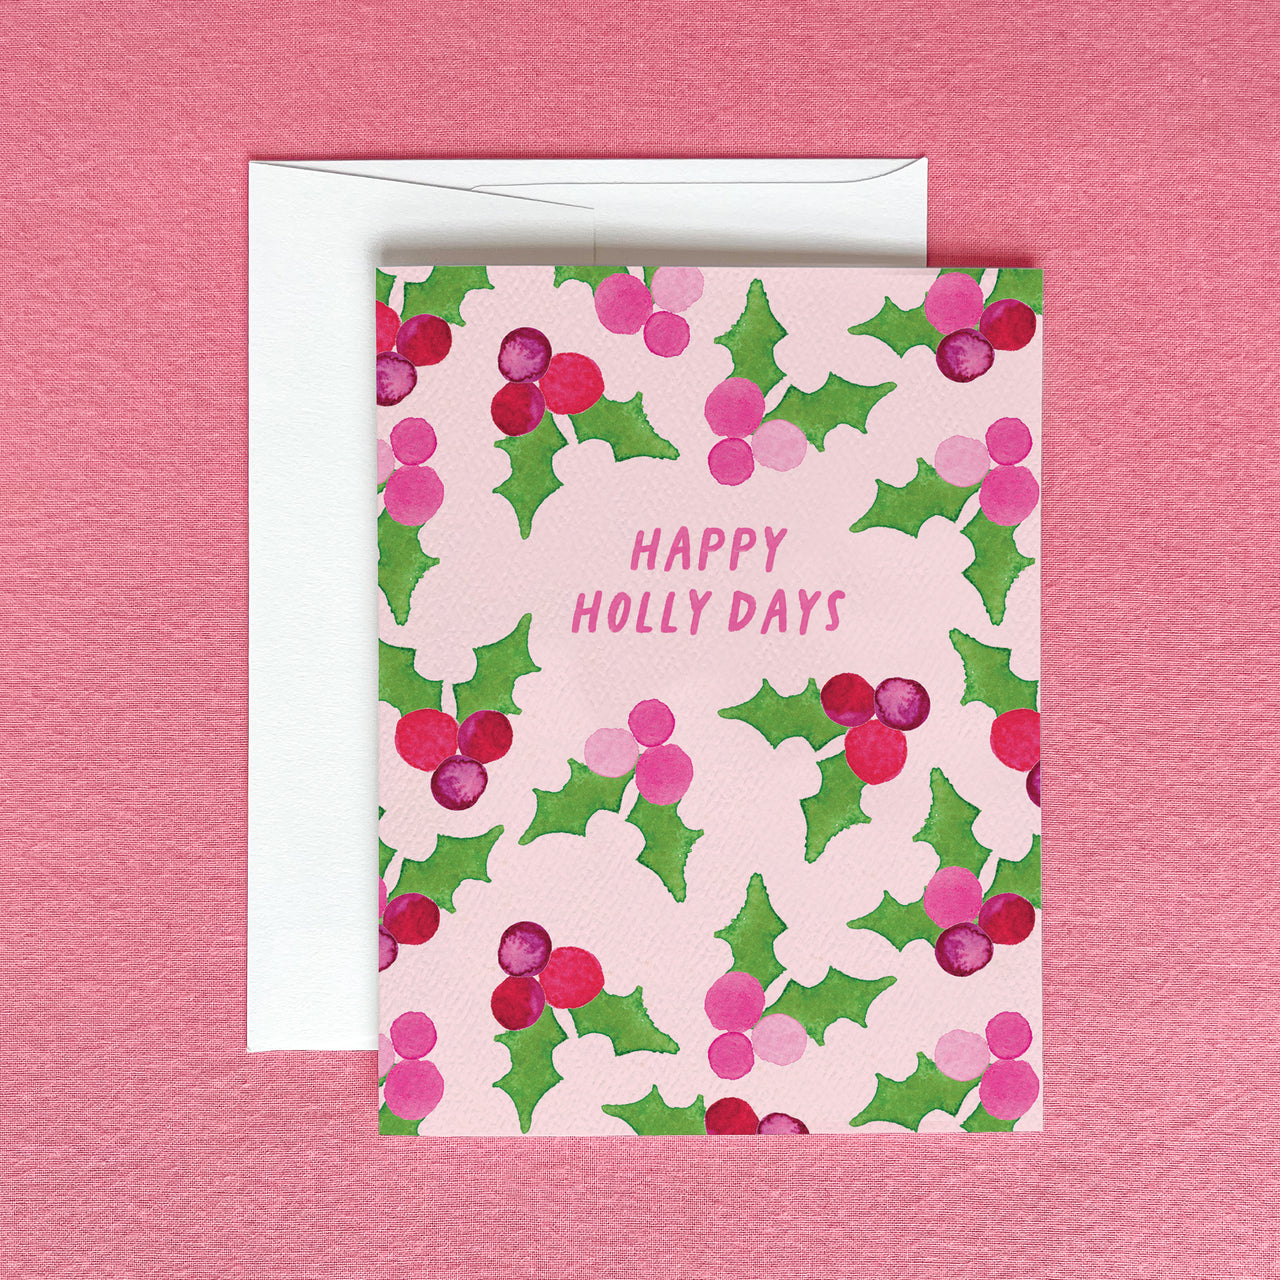 Happy Holly Days Pink Christmas Greeting Card by Gert & Co